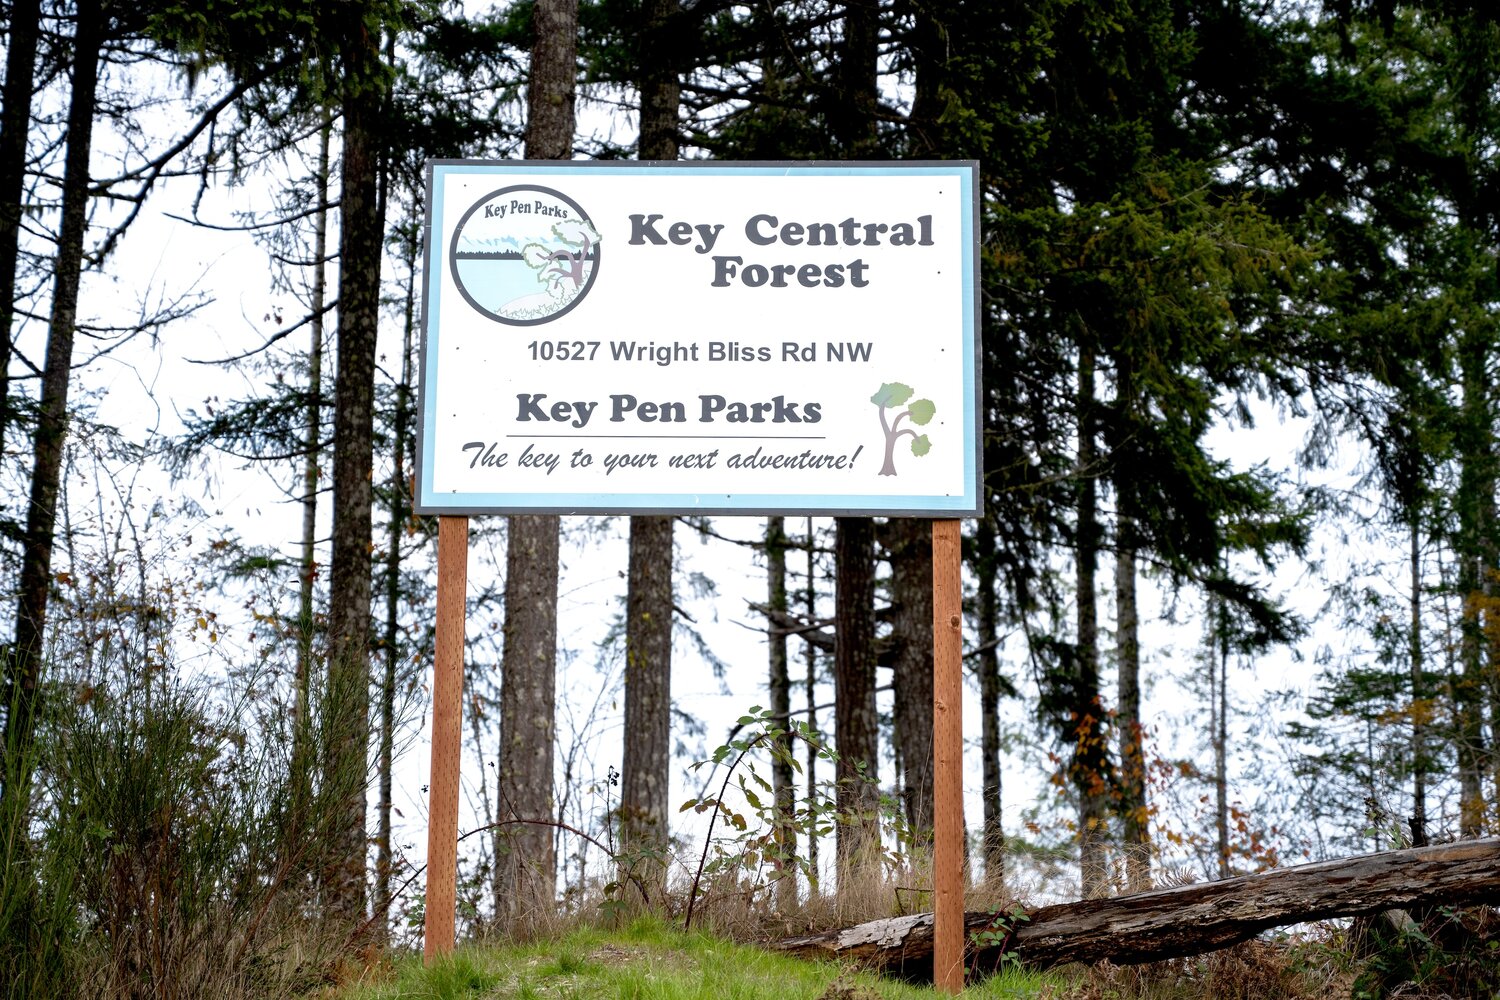 Coming soon? Expanded park land for the Key Peninsula.